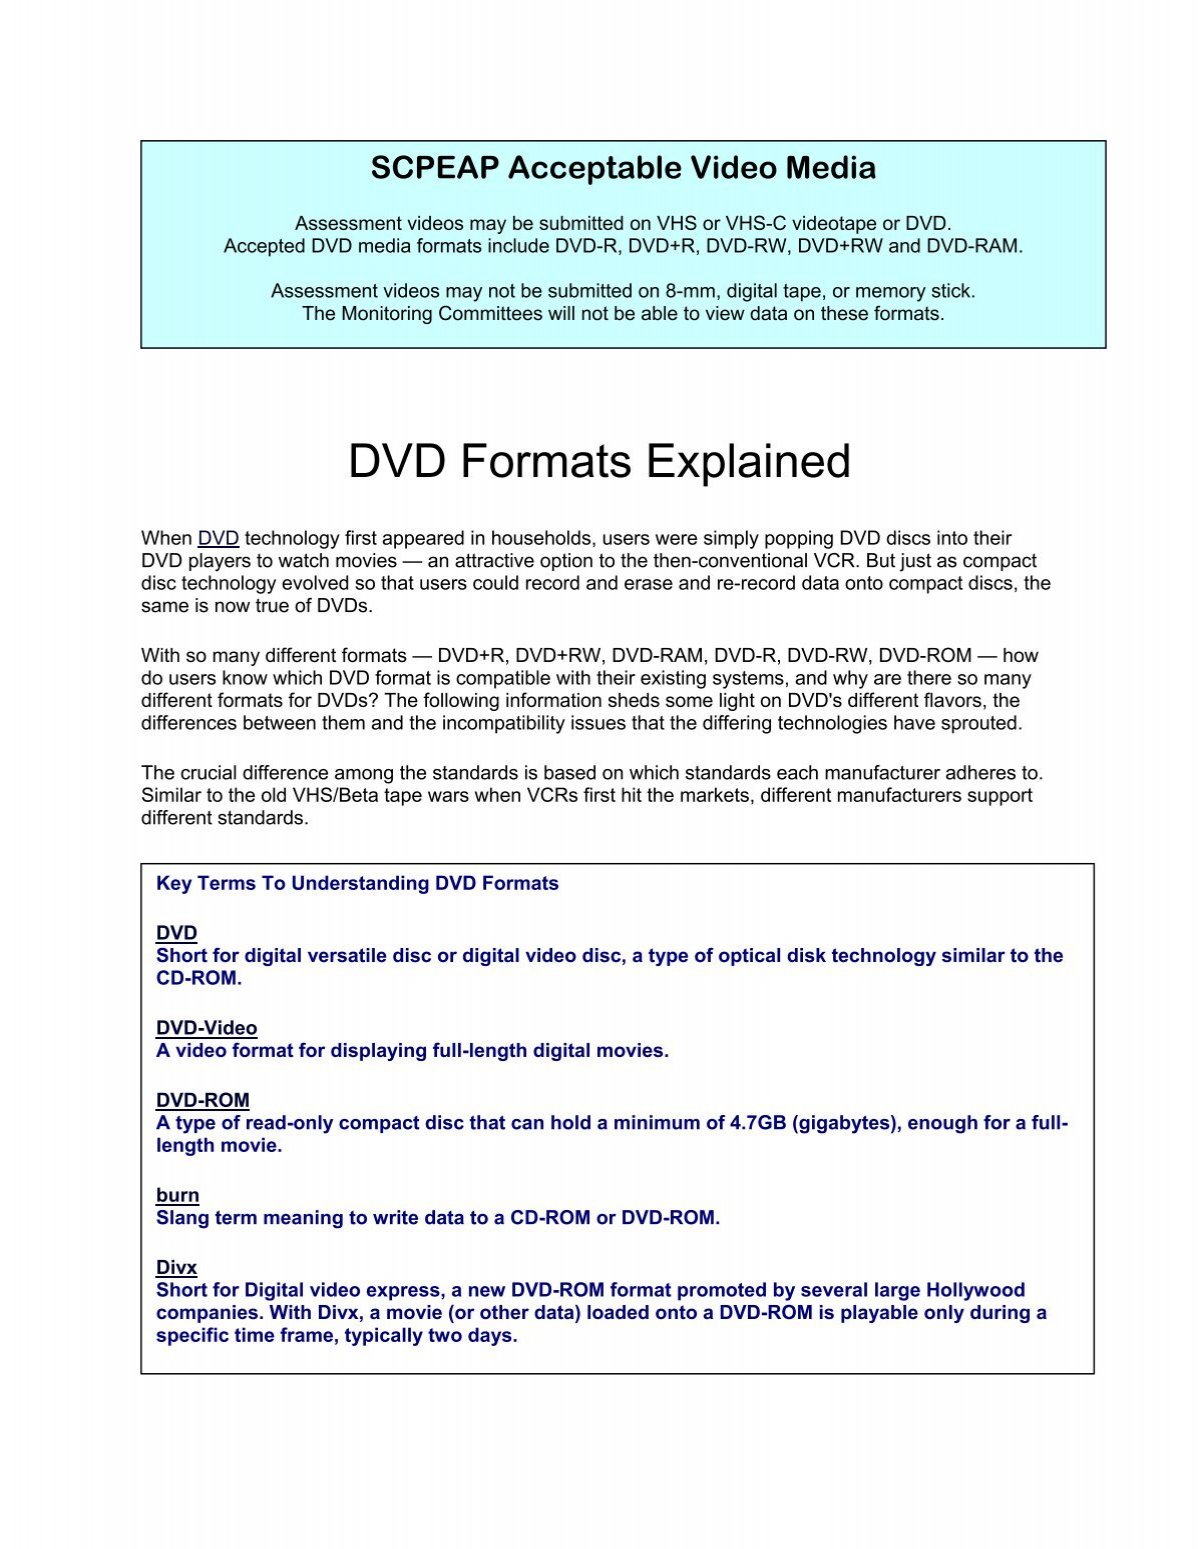 DVD Formats Explained